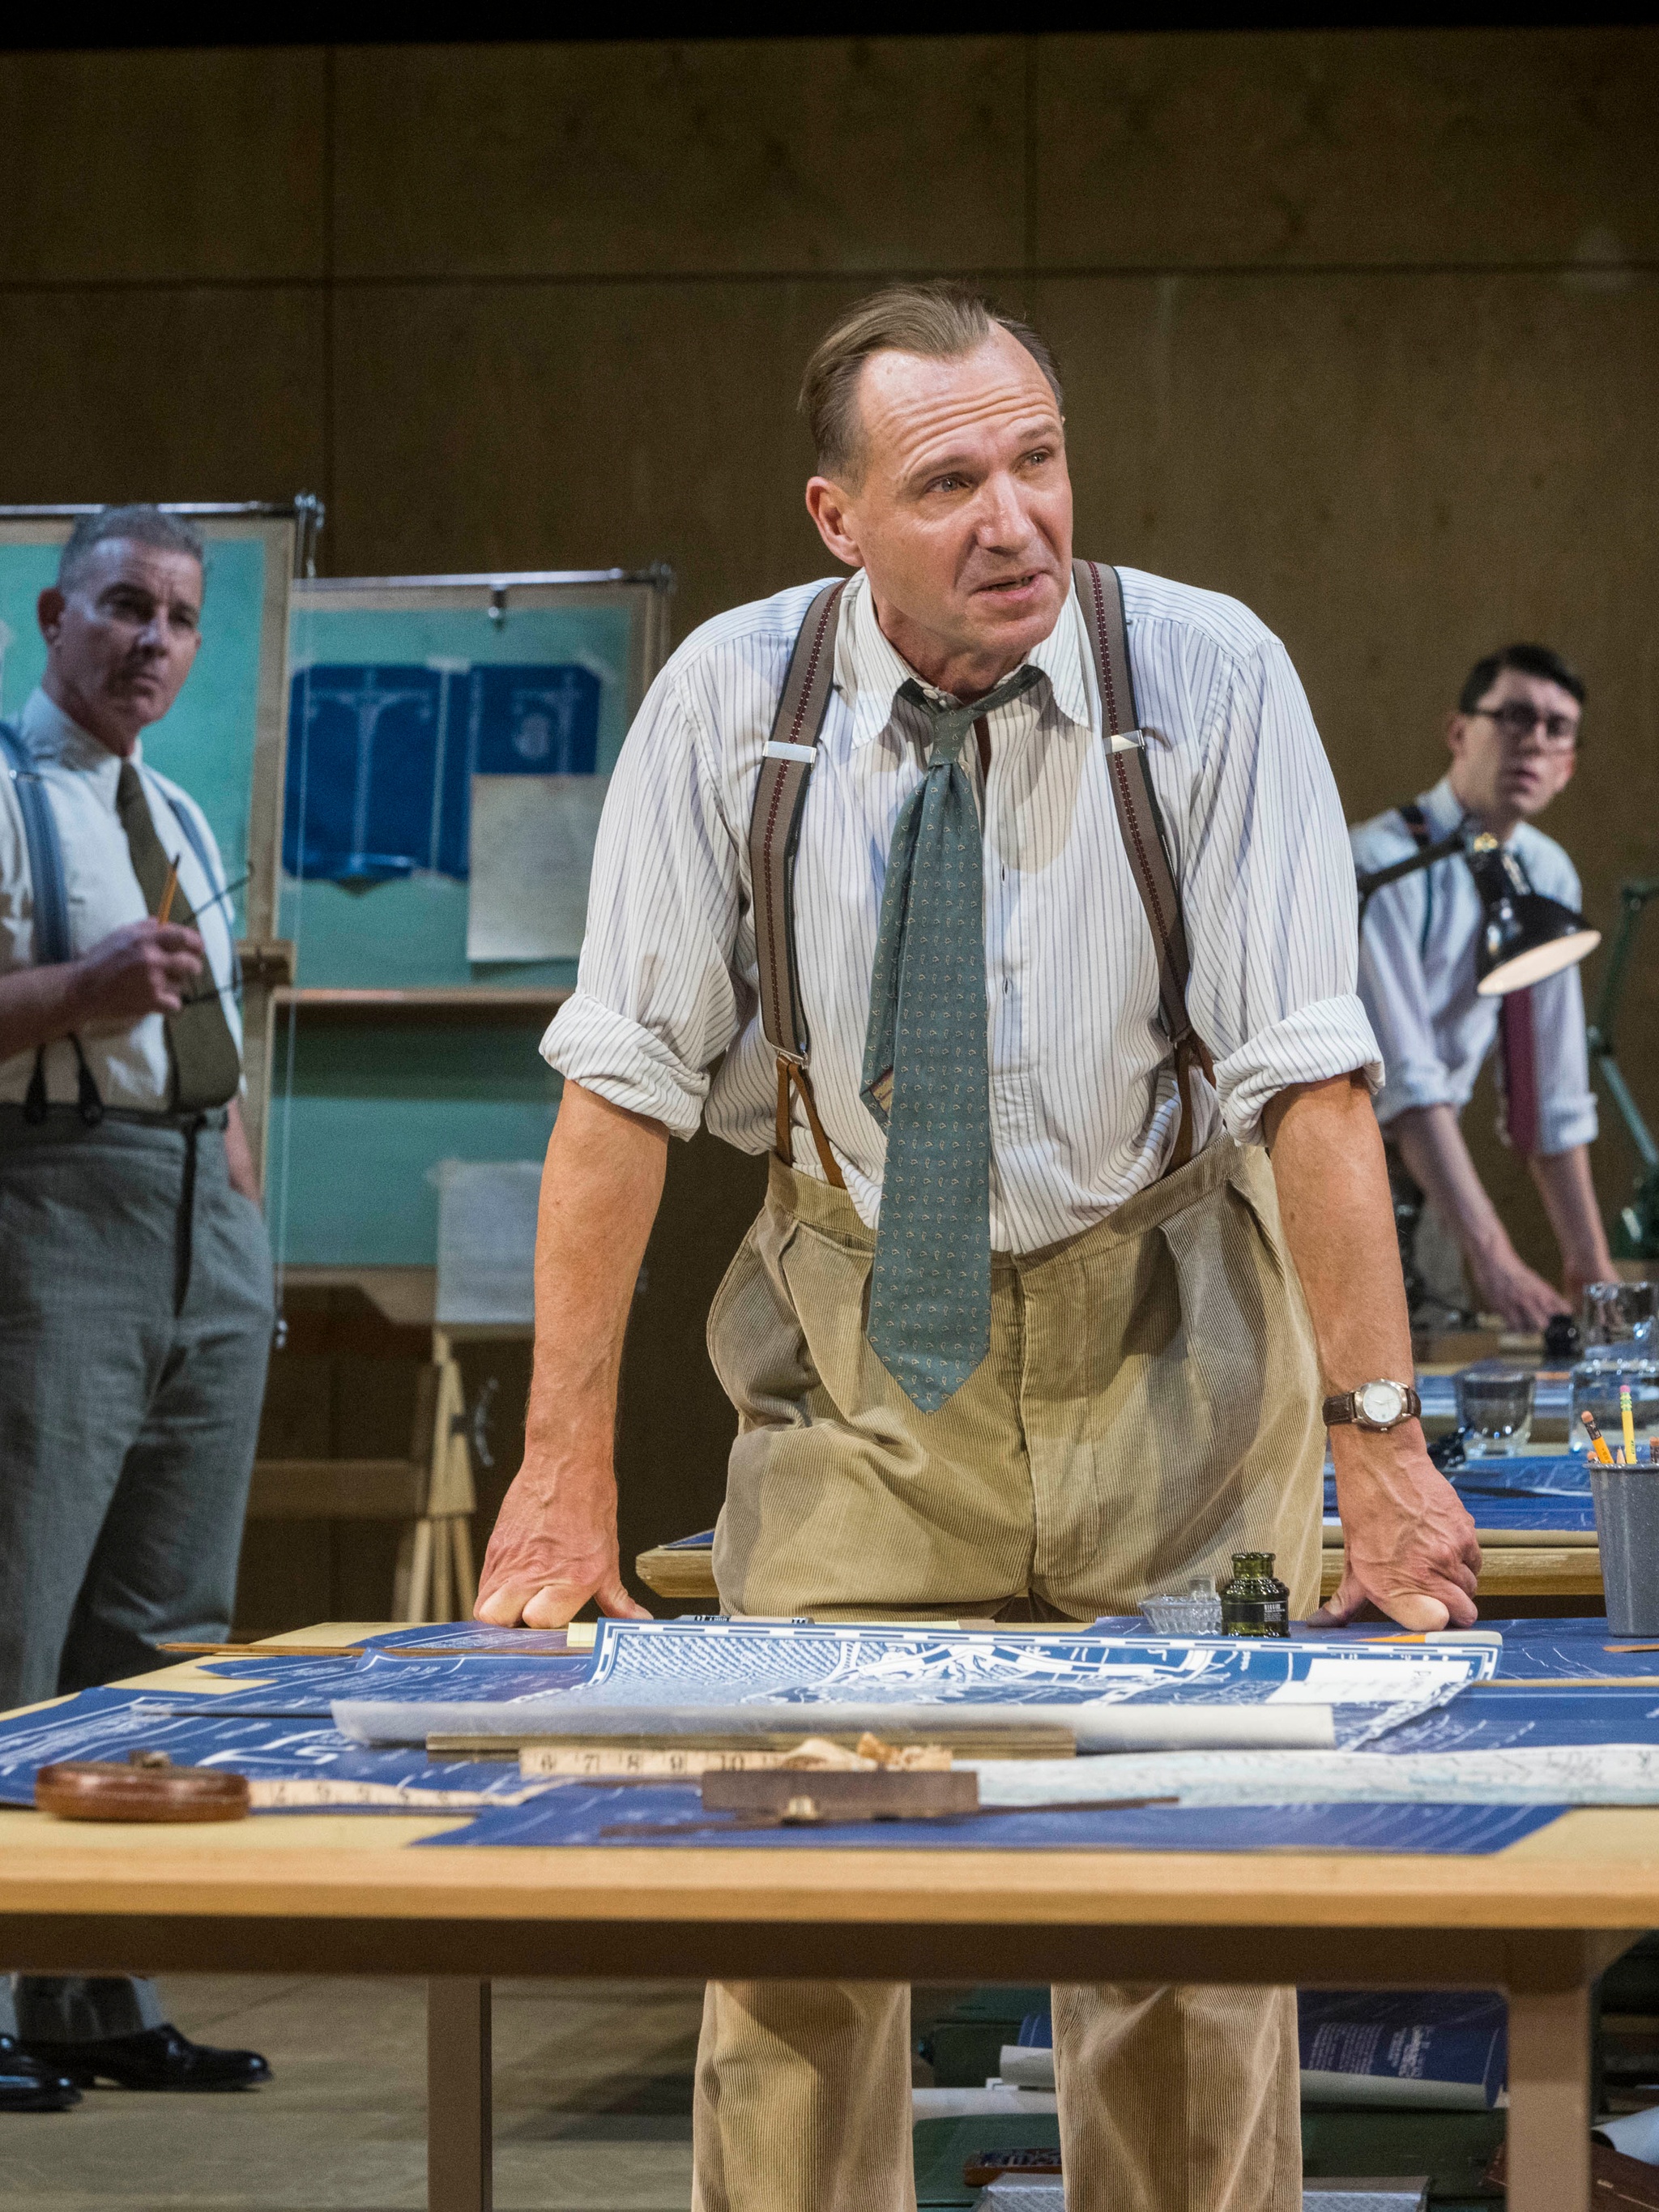 The actor Ralph Fiennes, a white man, stands leaning with both hands on a draftsman's table. He is in costume as Robert Moses, wearing khaki pants, suspenders, and a blue gray blue tie. In the background are two other actors dressed similarly looking toward him.  